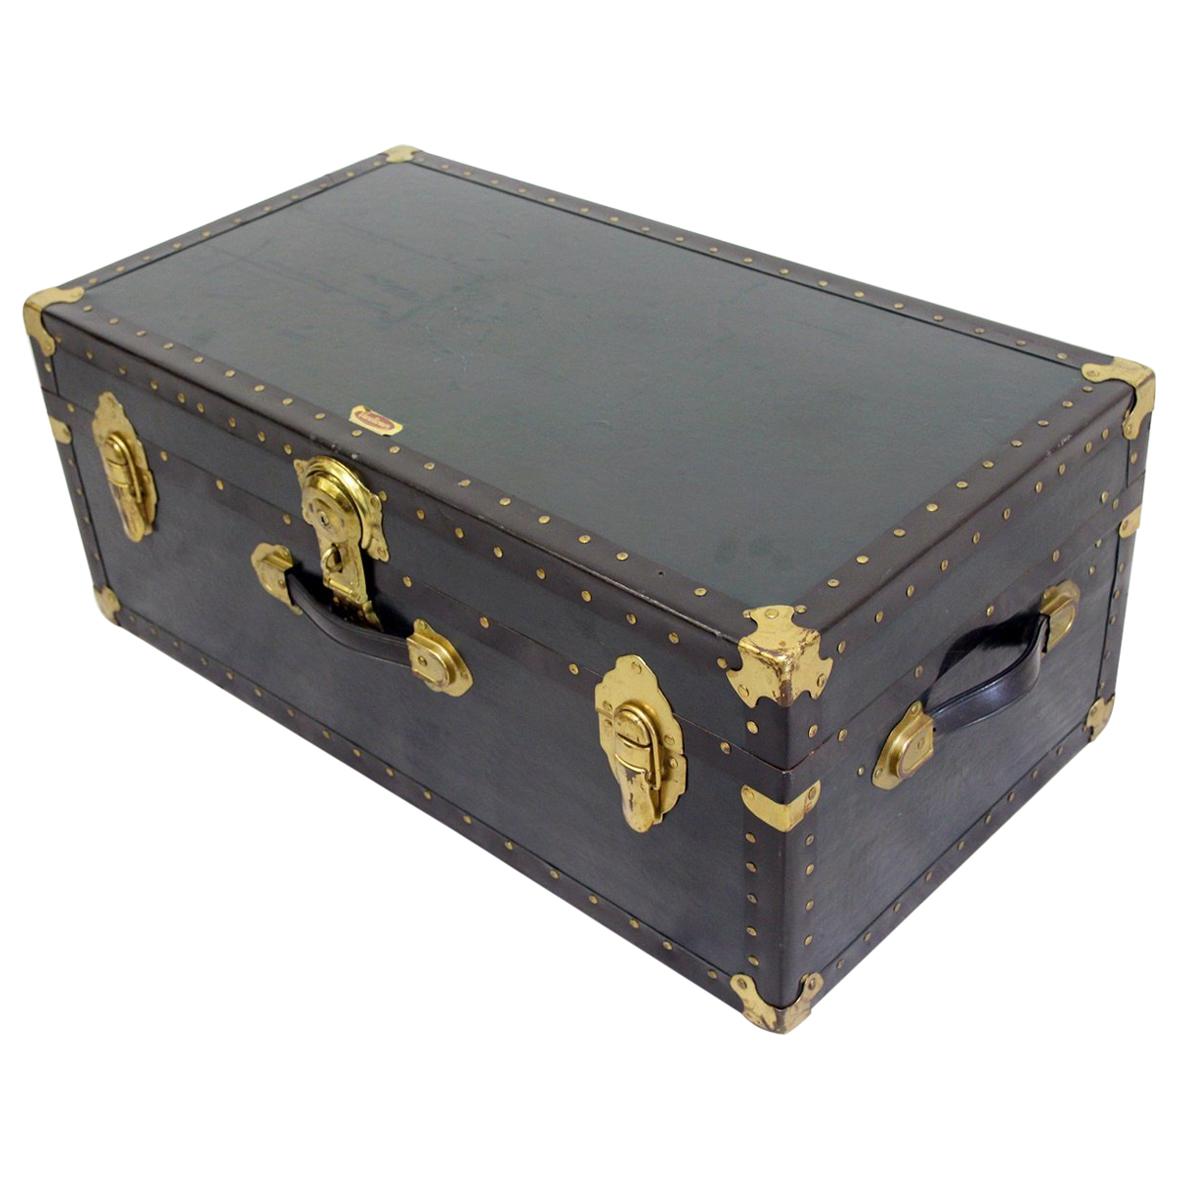 Old Suitcase Stool Antique Chair Coffee Table Overseas Case Vintage For Sale